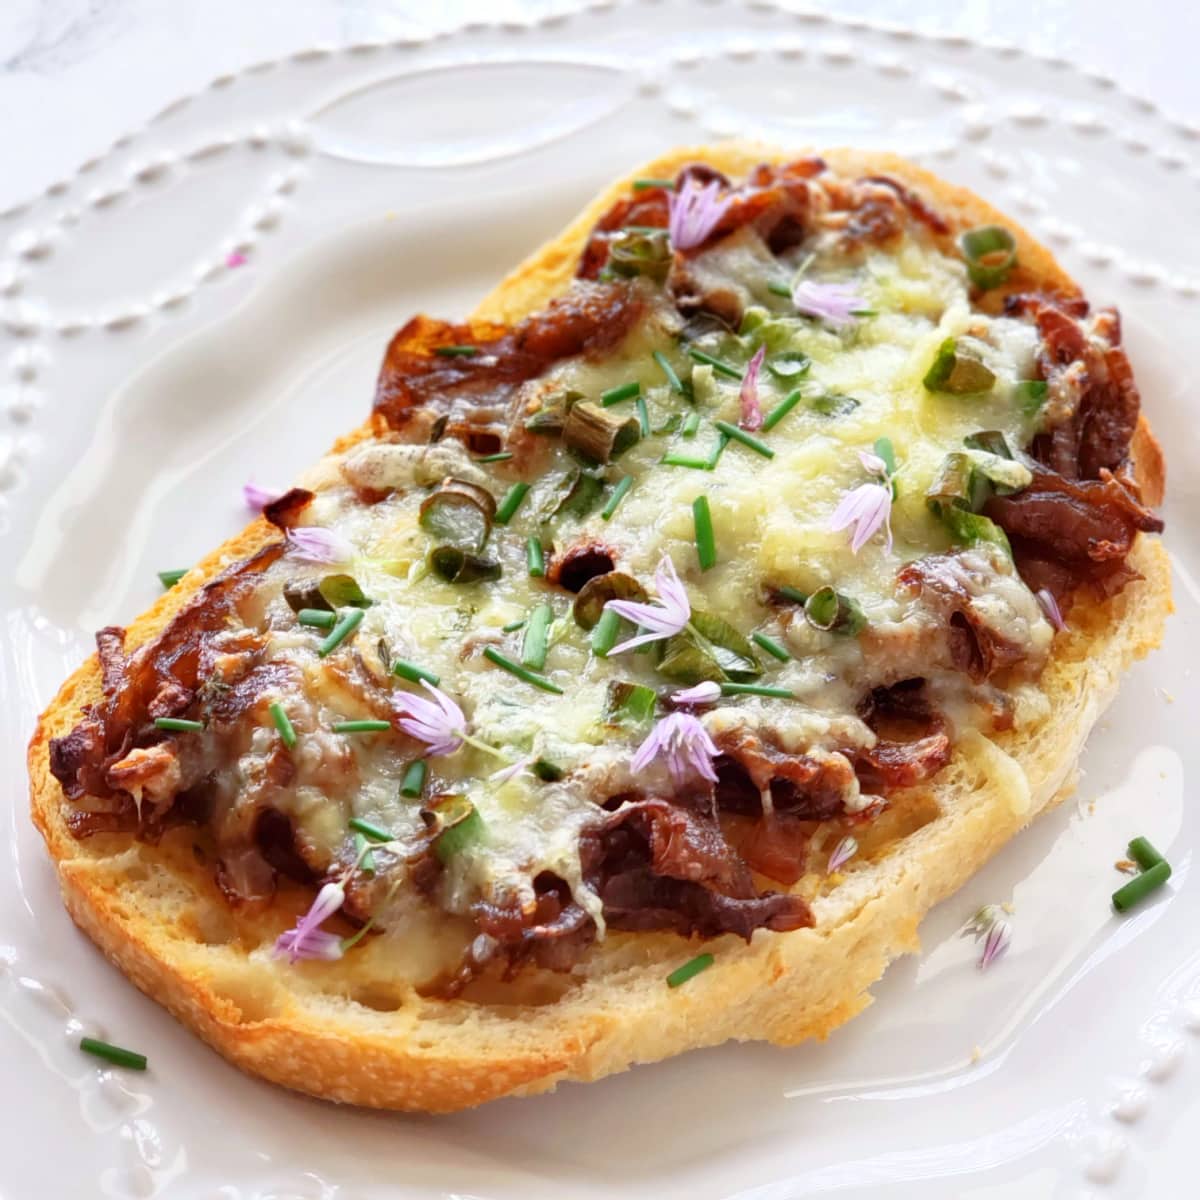 French Onion Open Faced Sandwich on a white textured plate with purple chive flowers decorating the top on ShockinglyDelicious.com